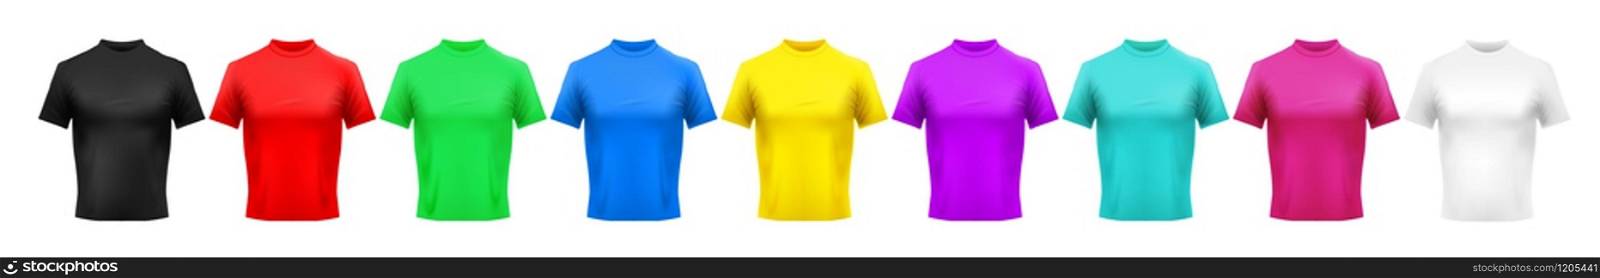 Realistic color t-shirt mockup. Red, green and blue men clothes. Yellow, purple and cyan colored shirt. Pink, black and white shirts template vector set. Bundle of blank tees, active wear, sportswear.. Realistic color t-shirt mockup. Red, green and blue men clothes. Yellow, purple and cyan colored shirt. Pink, black and white shirts template vector set